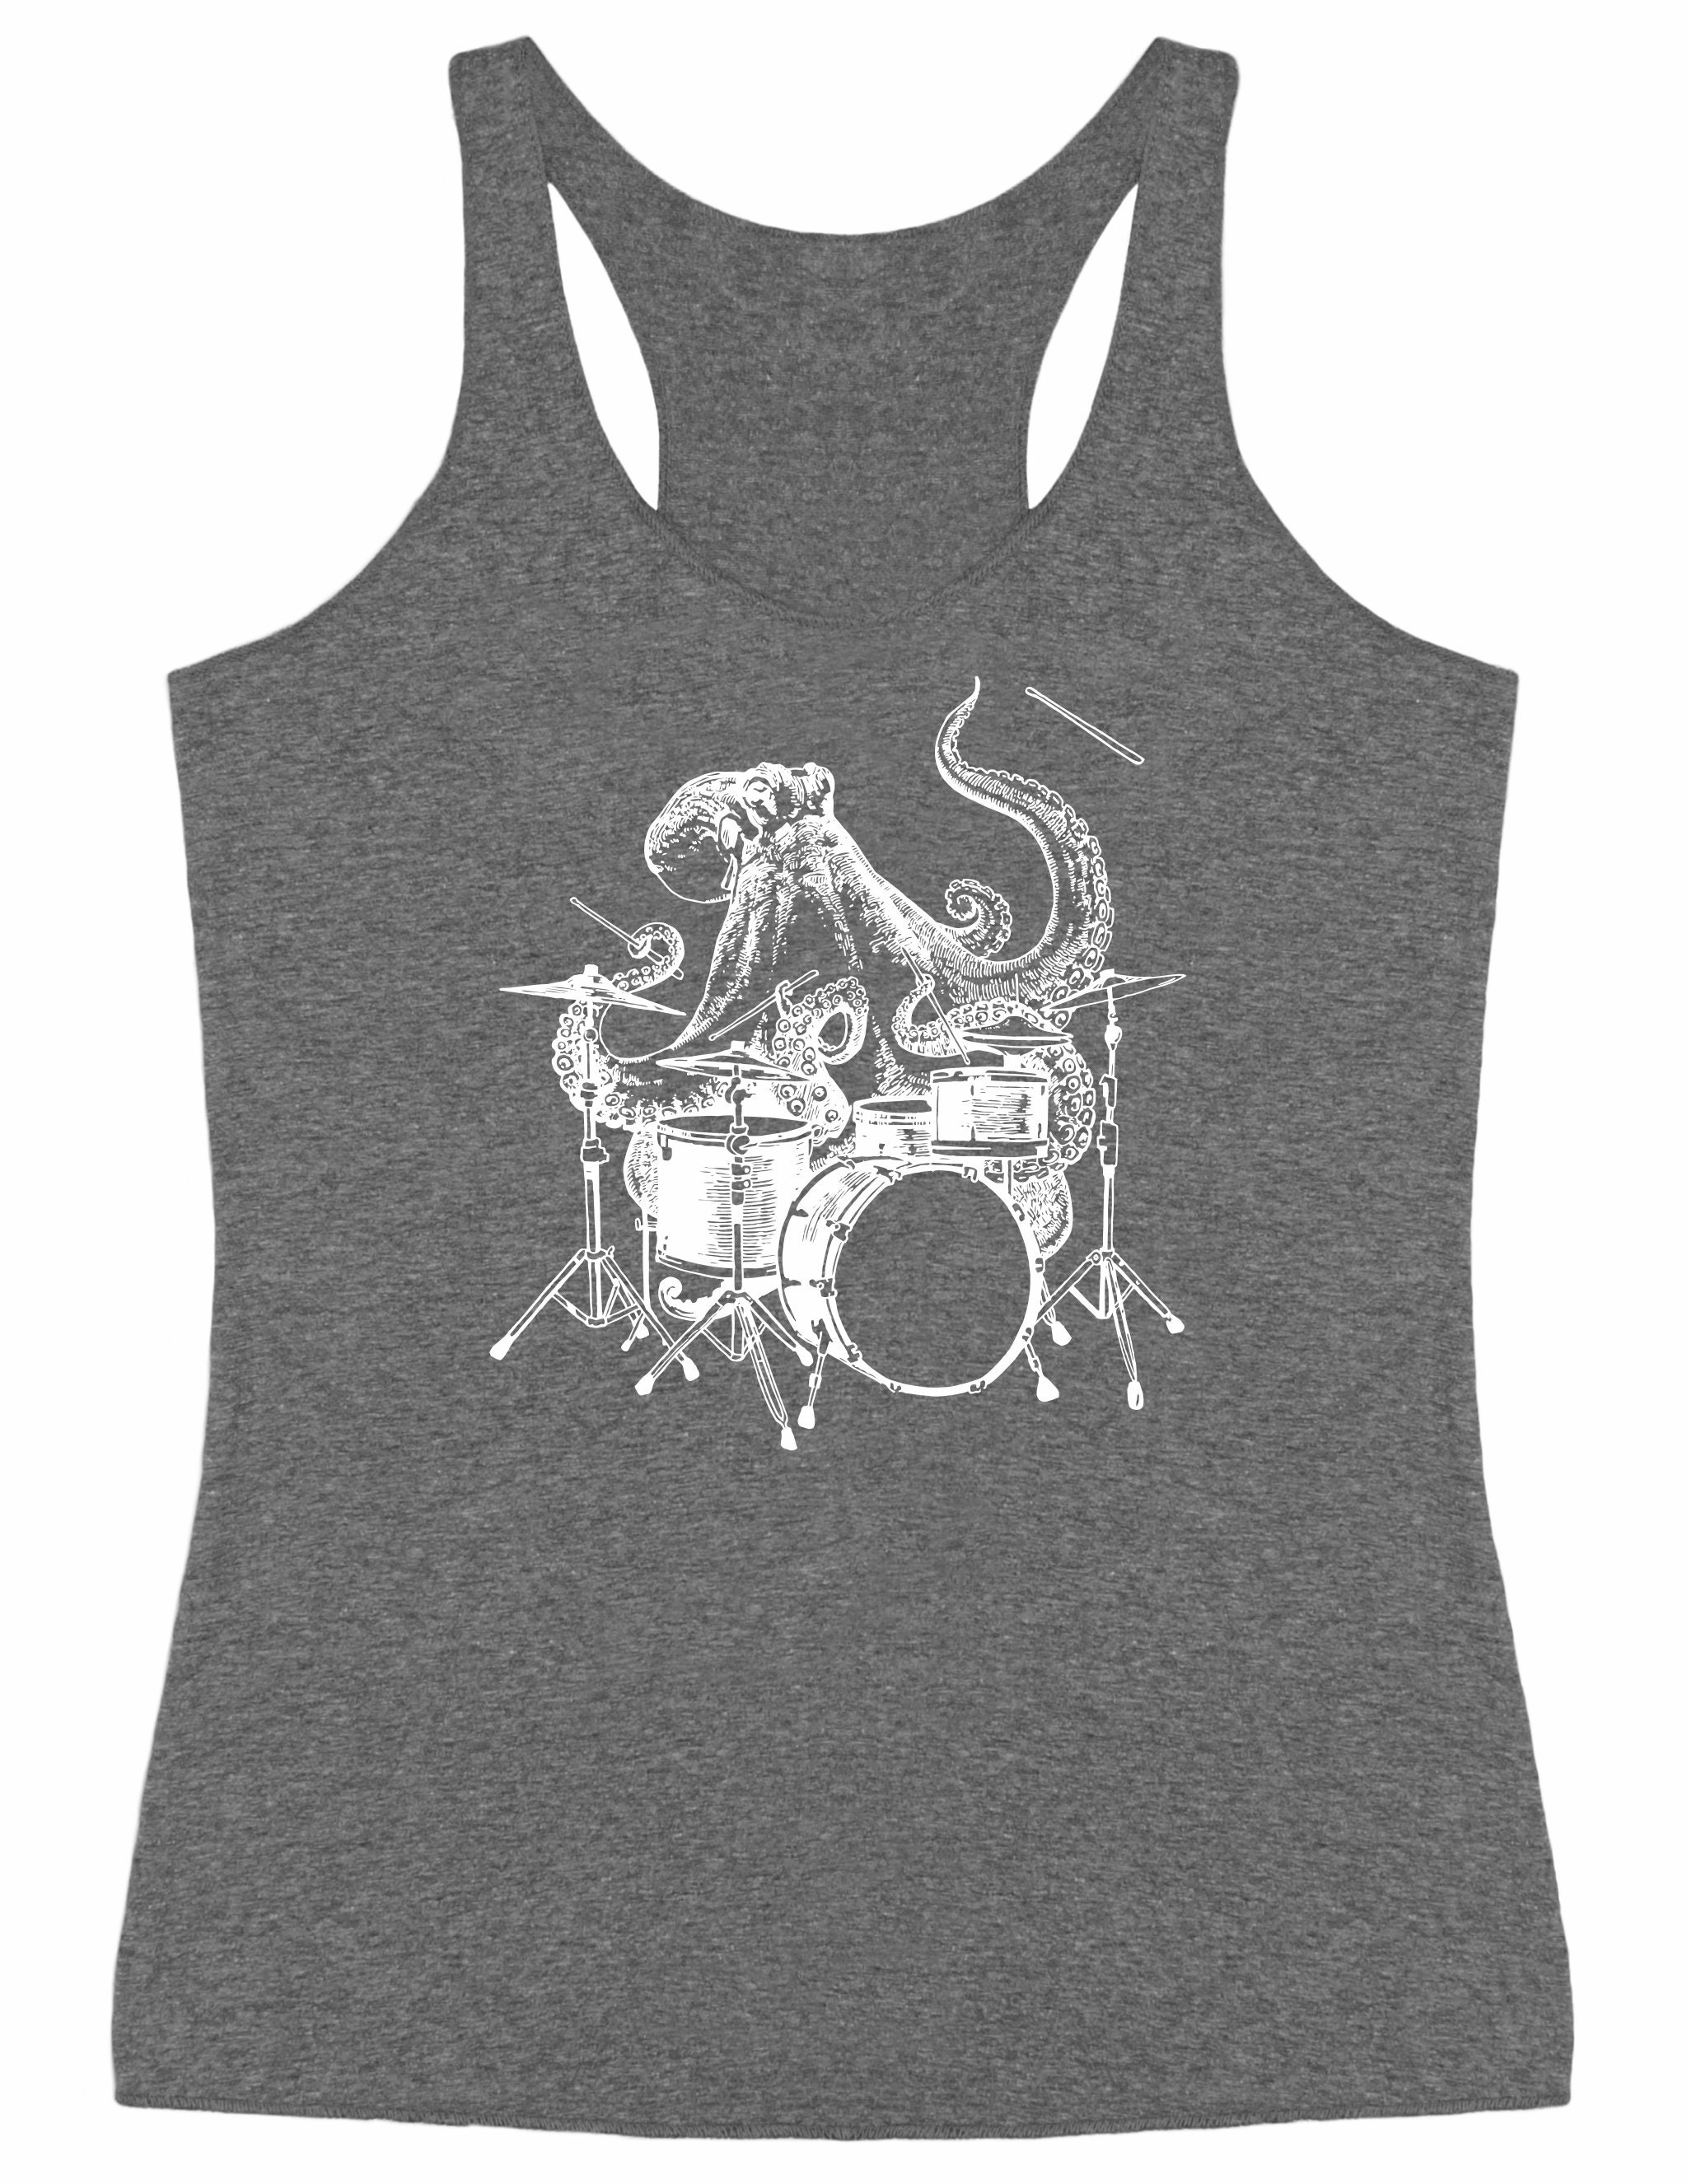 Octopus Playing Drums Women Tri-Blend Vintage Grey Tank Top Gift For Her, Girlfriend Birtday, Drummer Wife Beach Mom Gifts Seembo